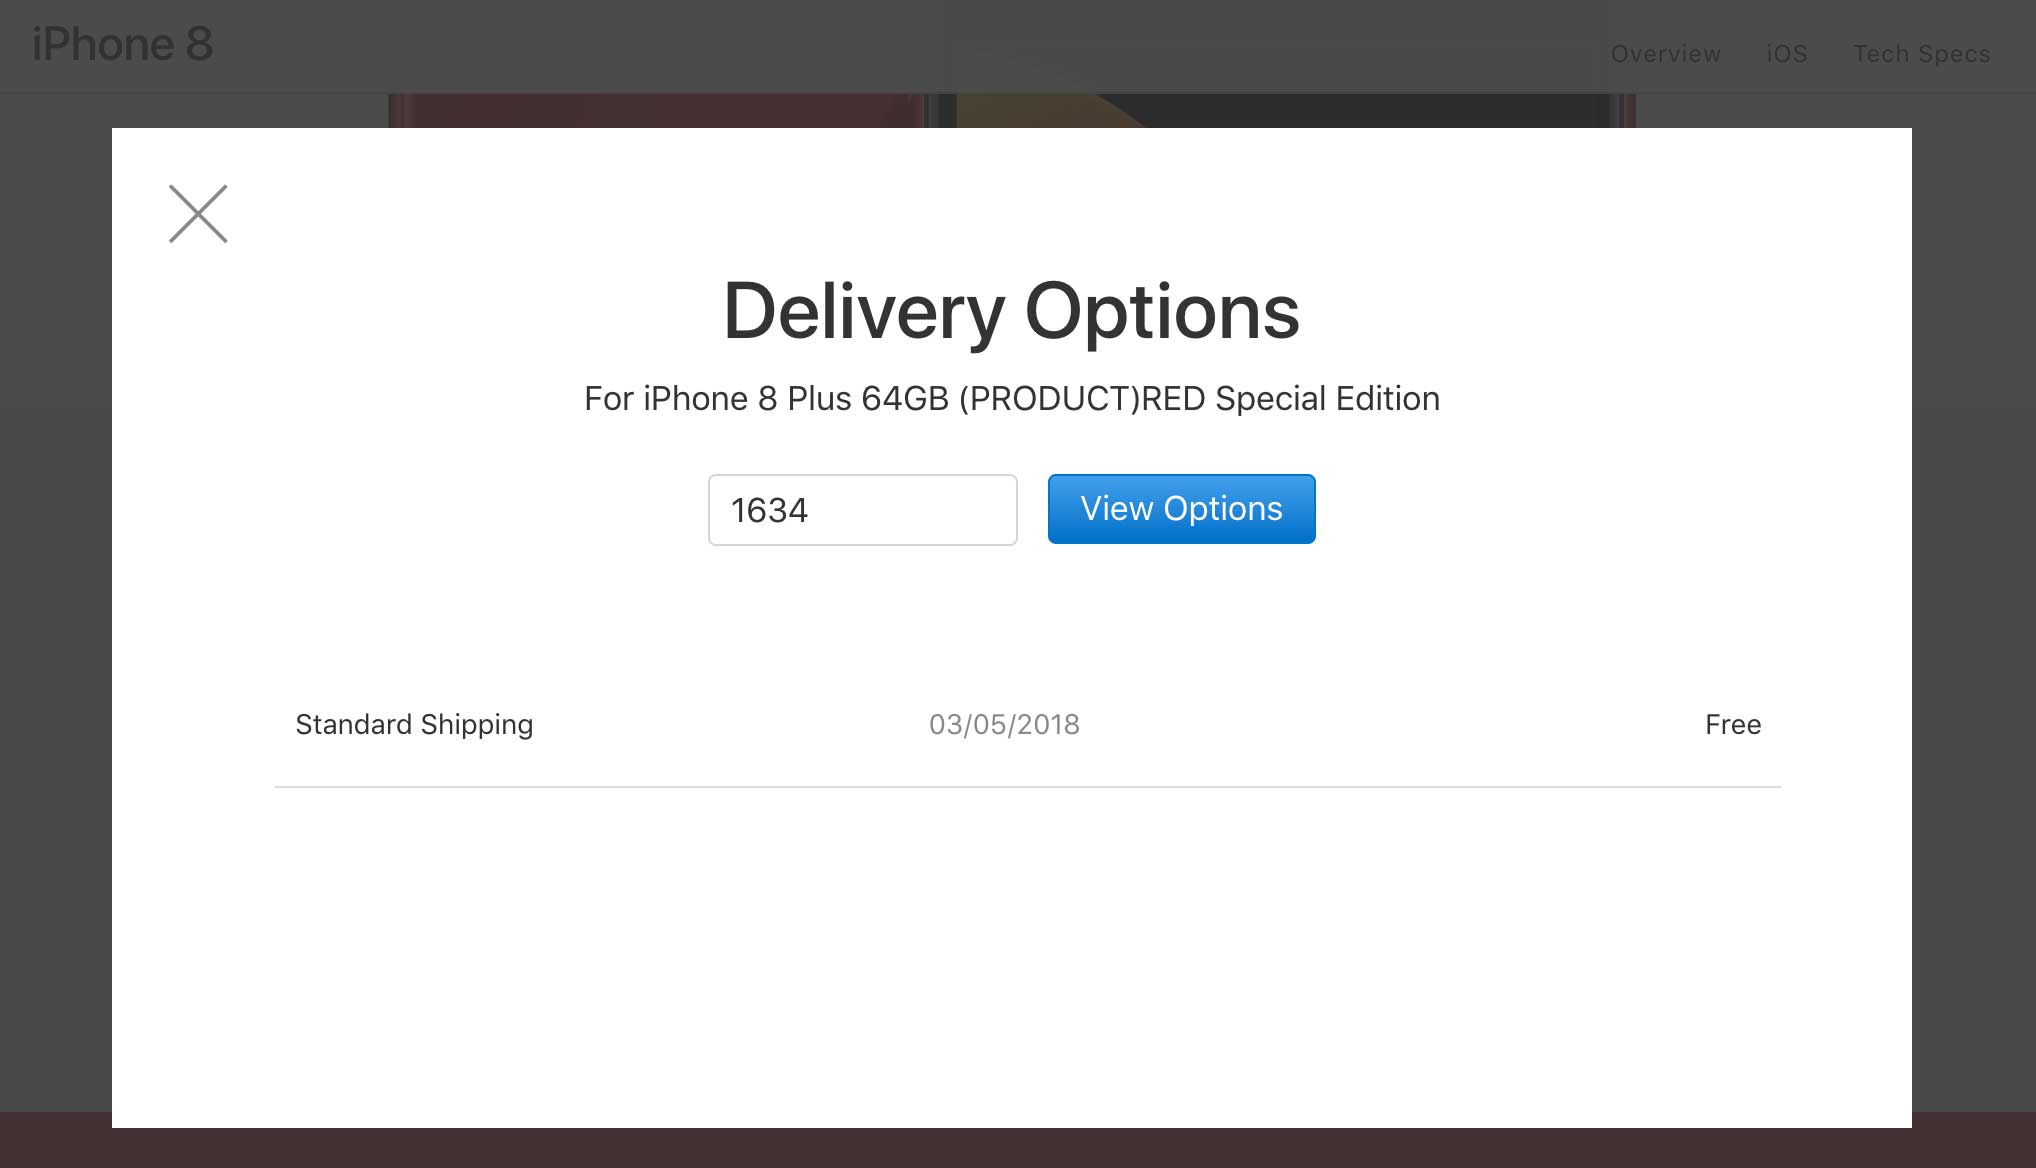 Apple iPhone 8 and iPhone 8 Plus (Product)Red Special Edition delivery date to BGC on Revu Philippines